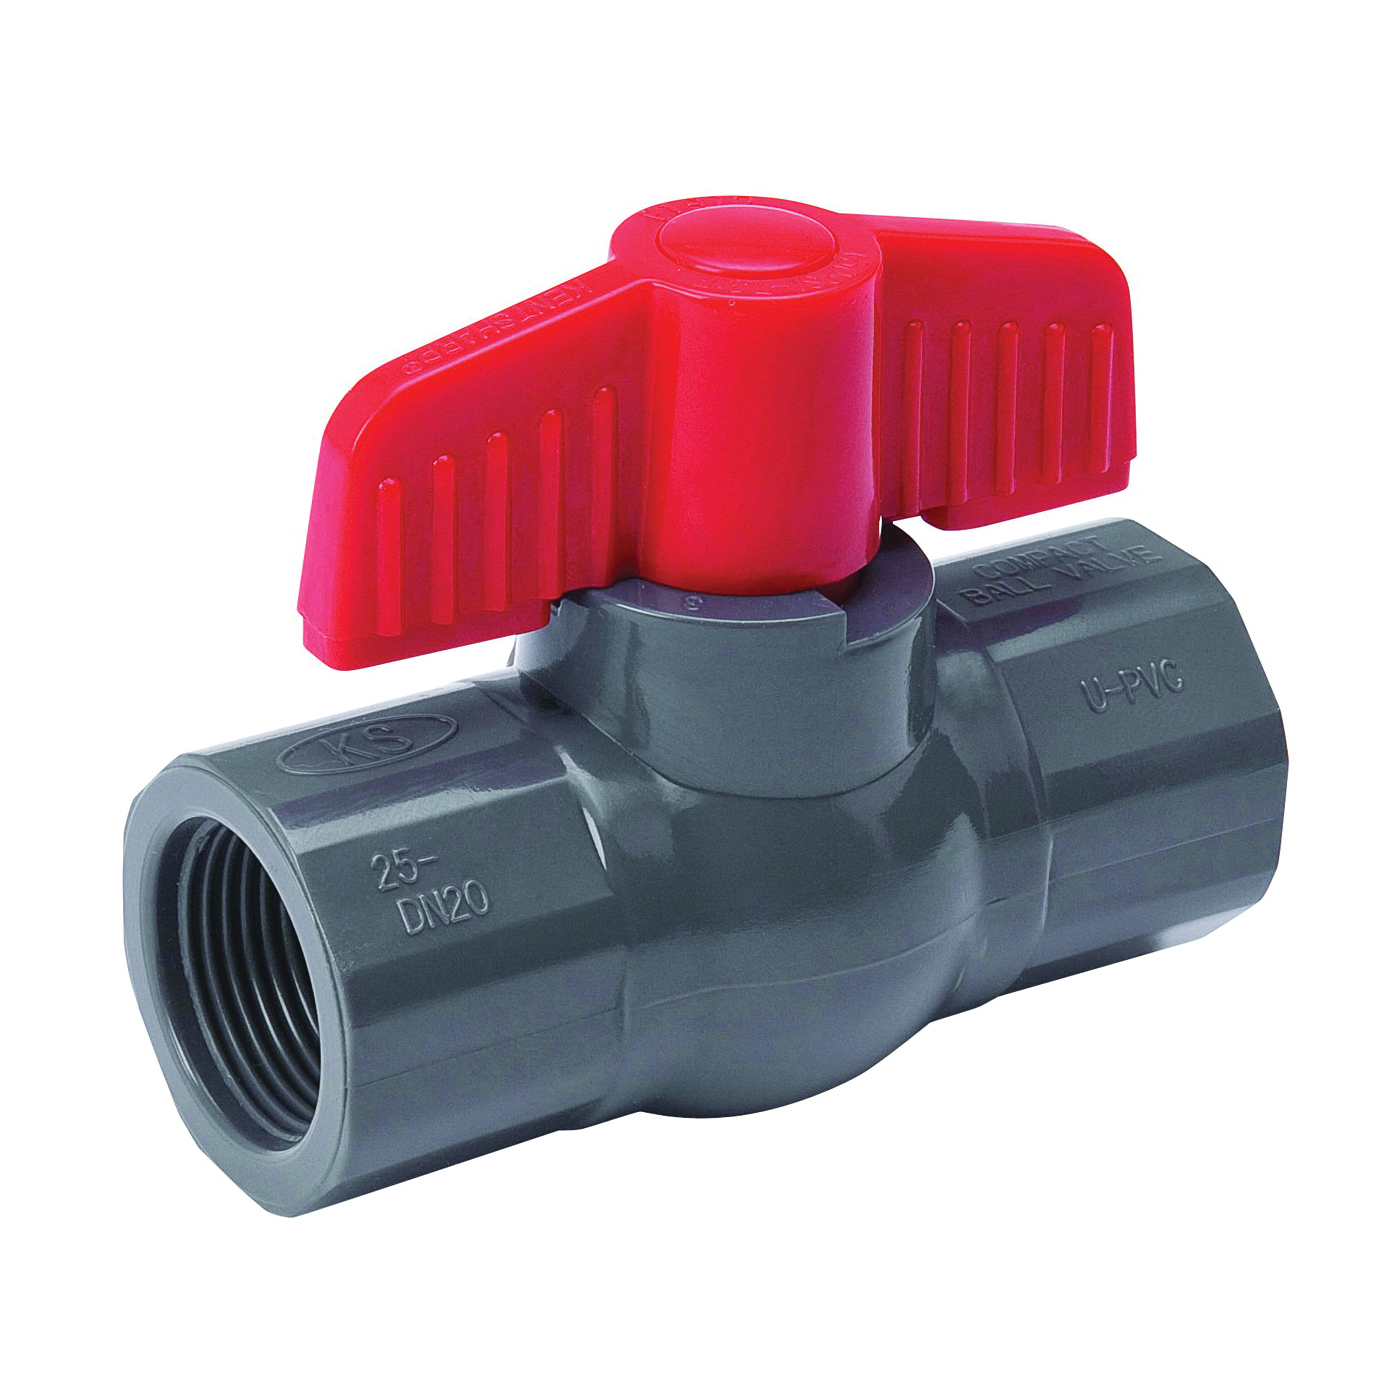 107-103 Ball Valve, 1/2 in Connection, FPT x FPT, 150 psi Pressure, PVC Body